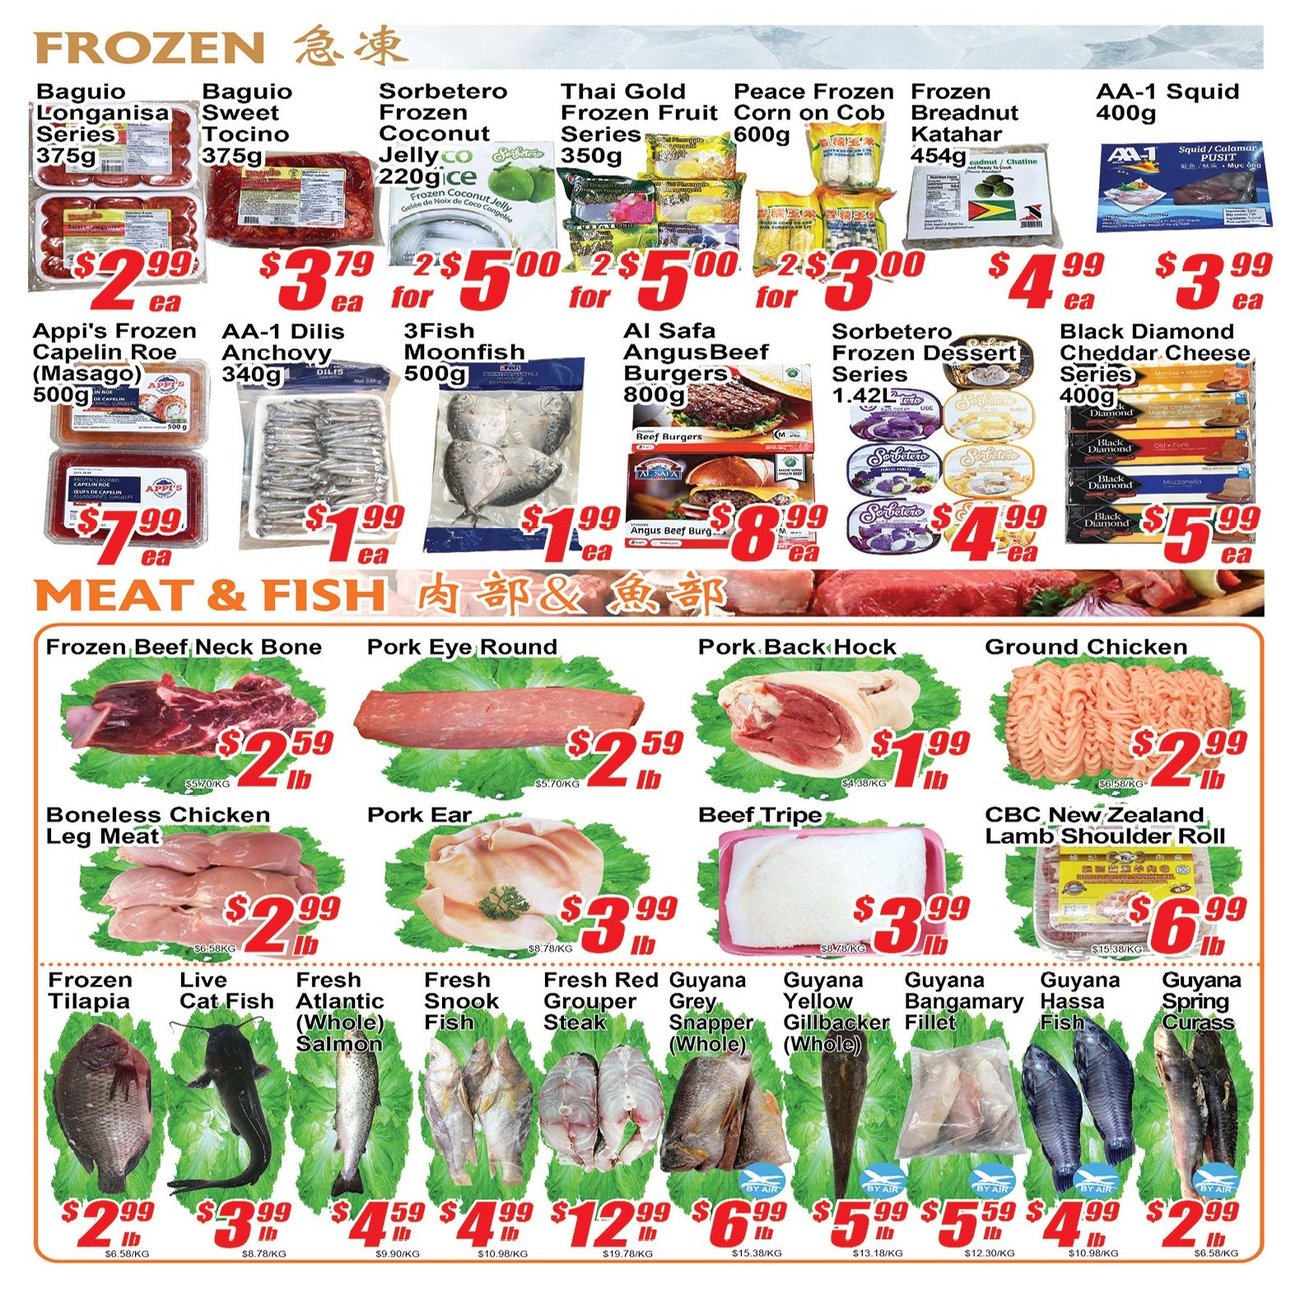 Jian Hing Supermarket - Scarborough Store - Weekly Flyer Specials - Page 3